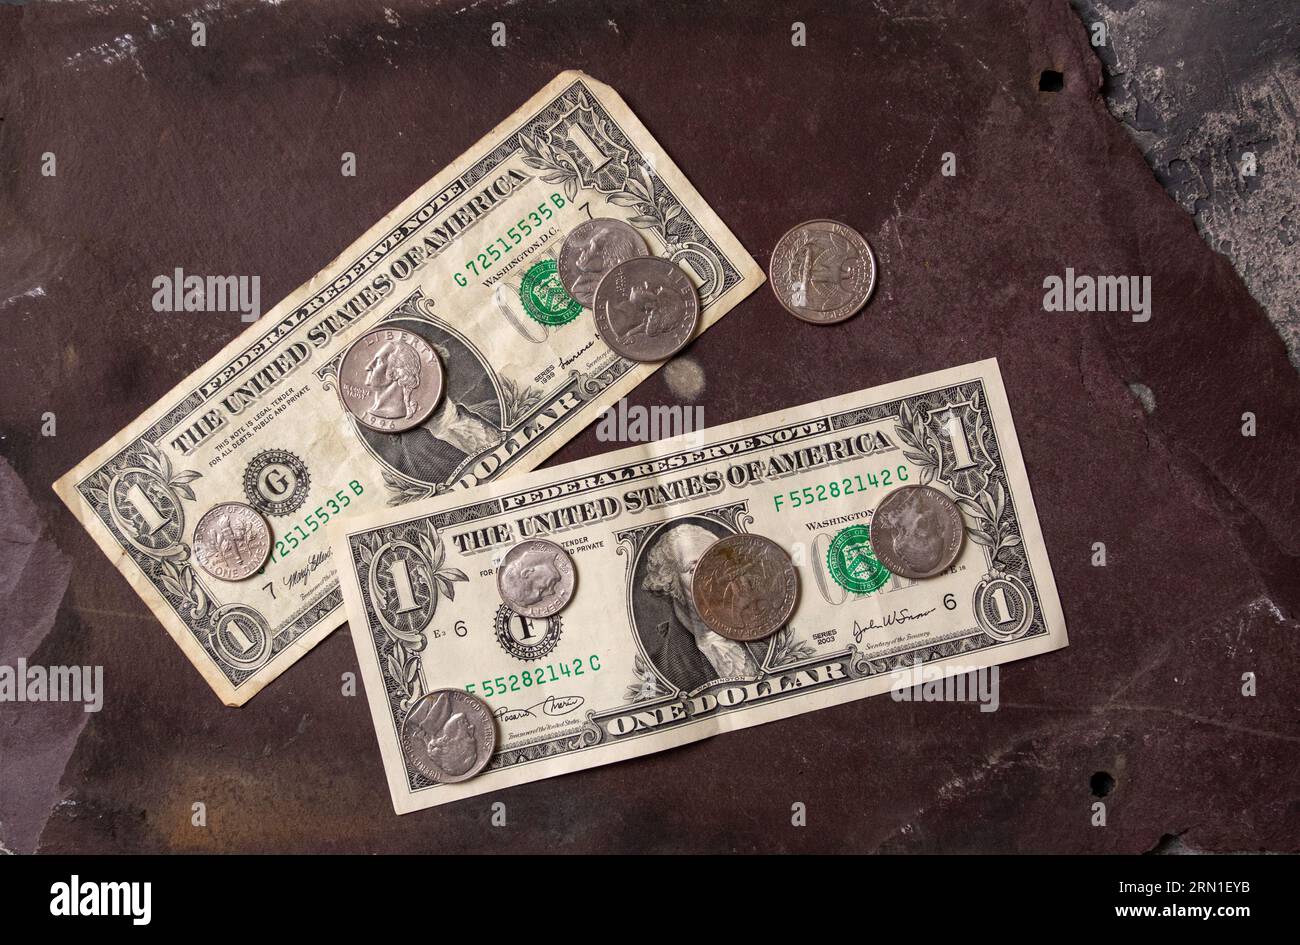 Two one dollar bills face up showing George Washington America's first president and assorted coins Stock Photo